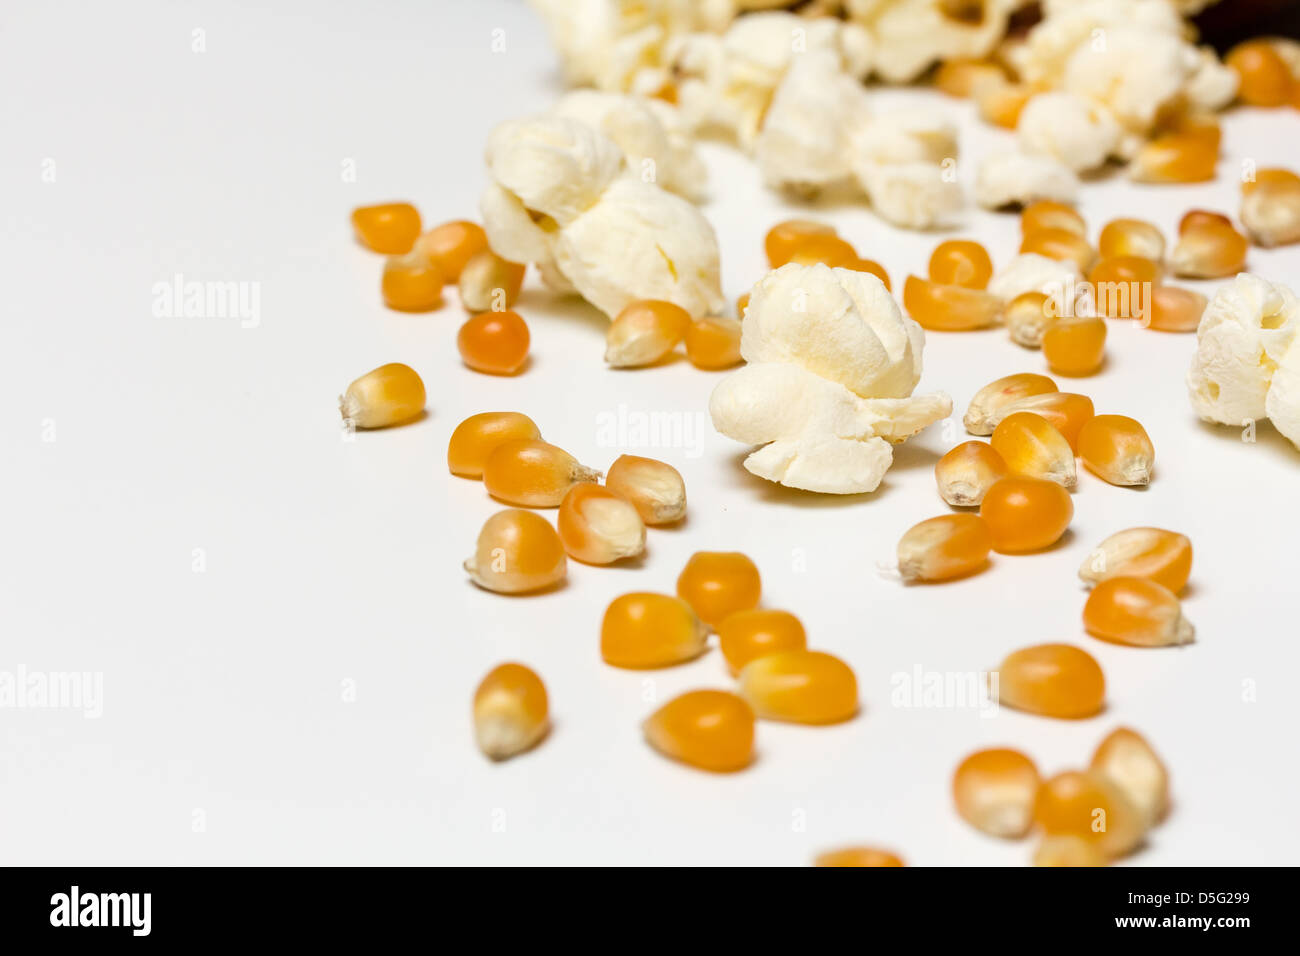 Popcorn and corn seeds rolling from a fallen bowl Stock Photo